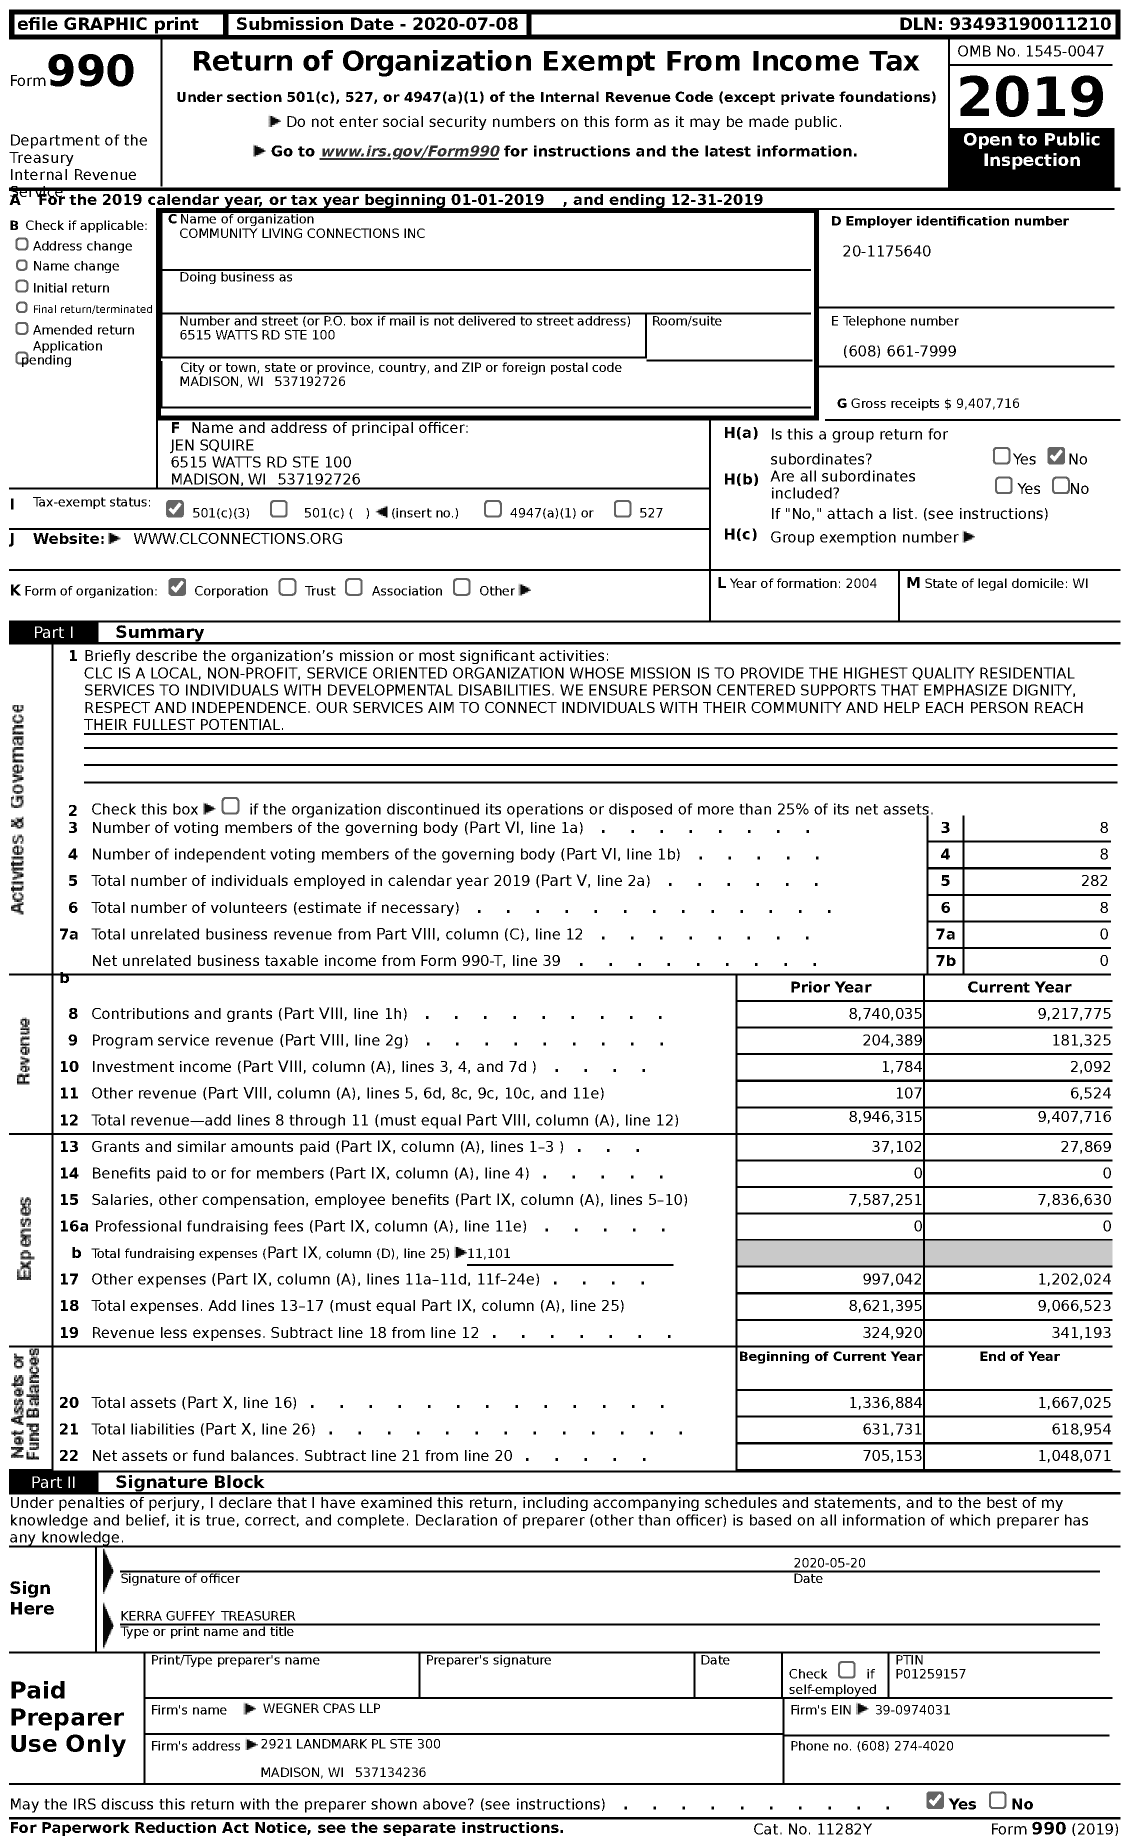 Image of first page of 2019 Form 990 for Community Living Connections Incorporated (CLC)